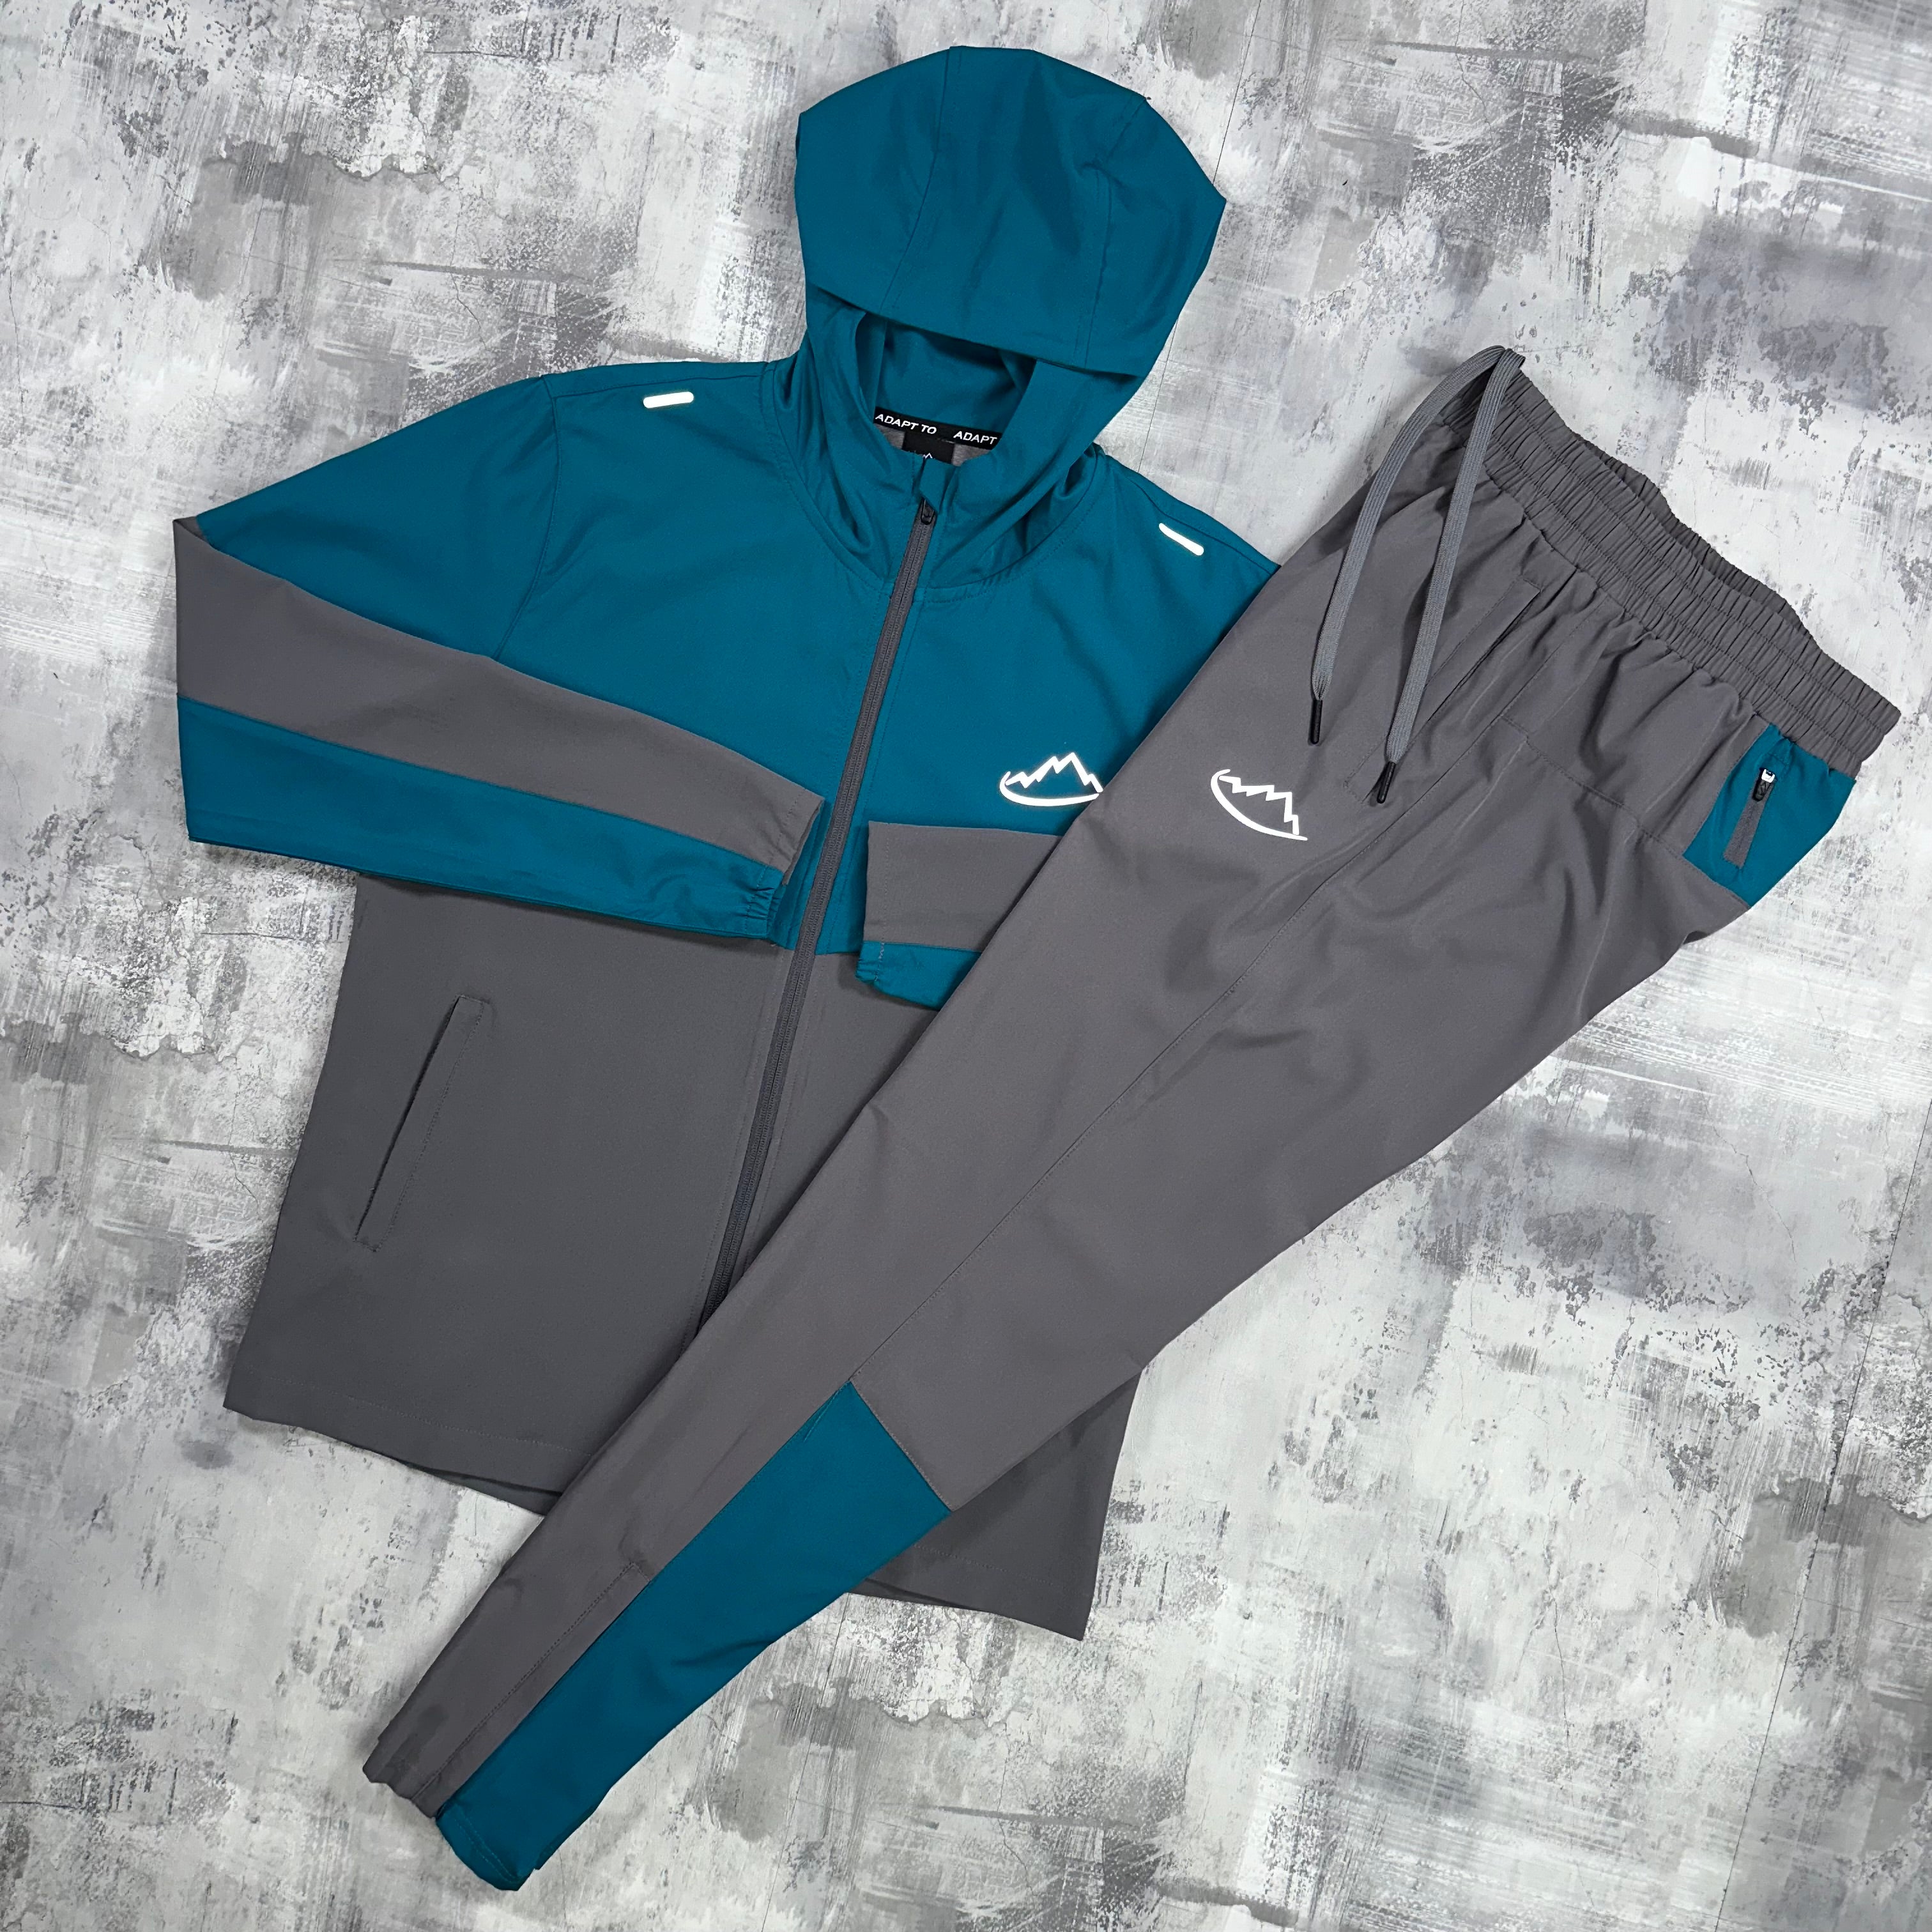 Adapt To Running 2.0 Set Grey / Teal - Jacket & Trousers